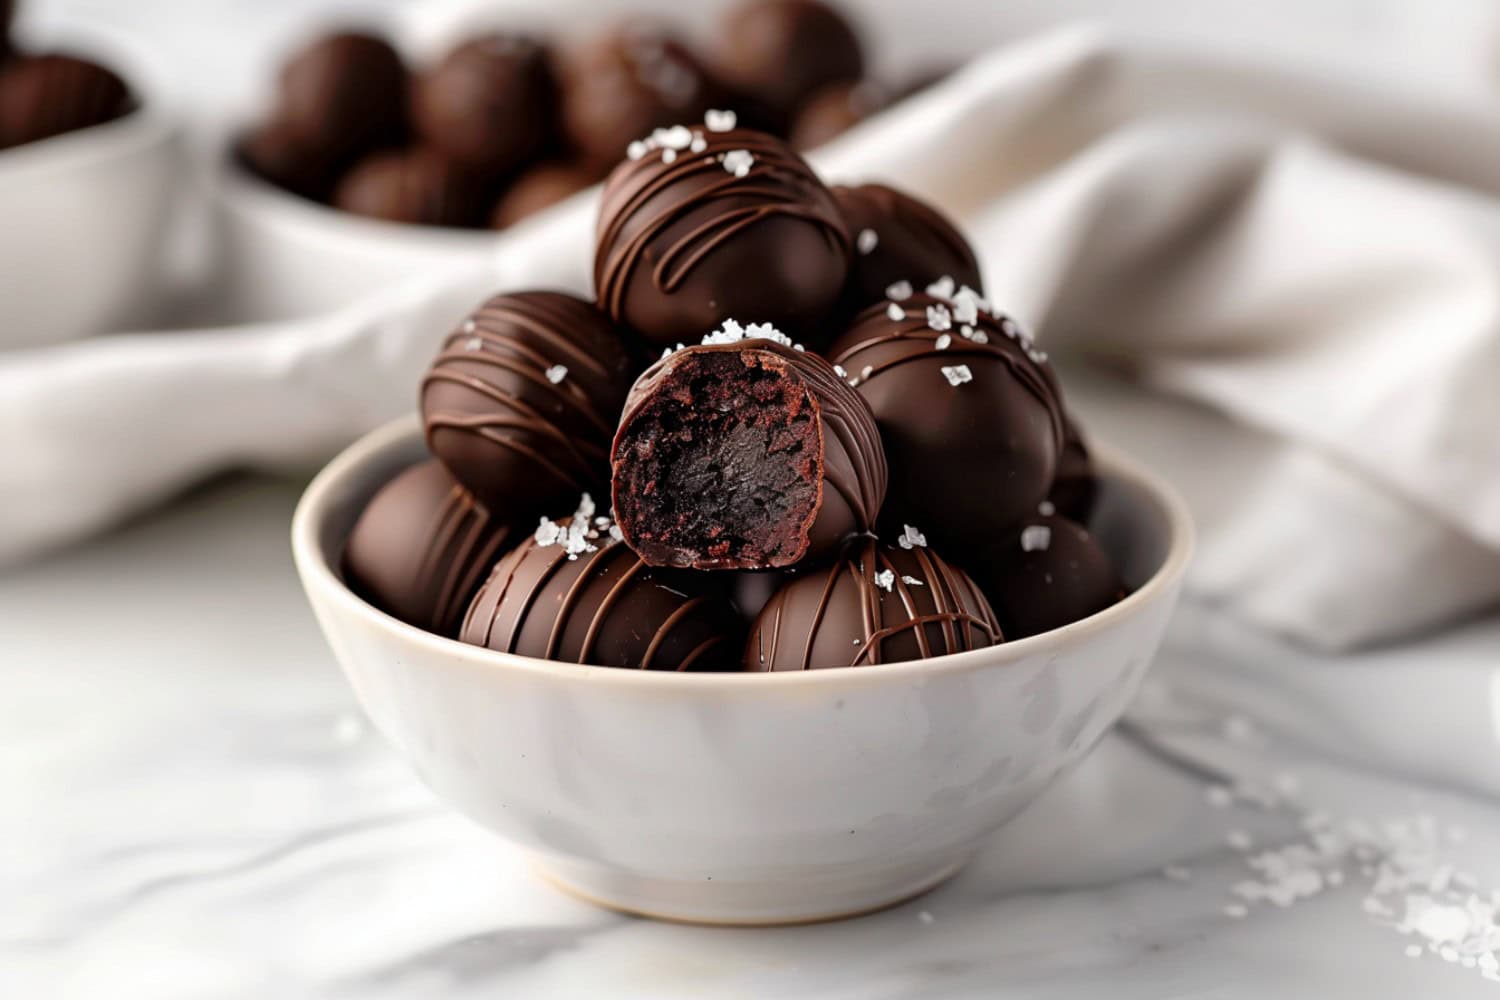 Delicious brownie truffles, dipped in melted chocolate and garnished with a sprinkle of sea salt